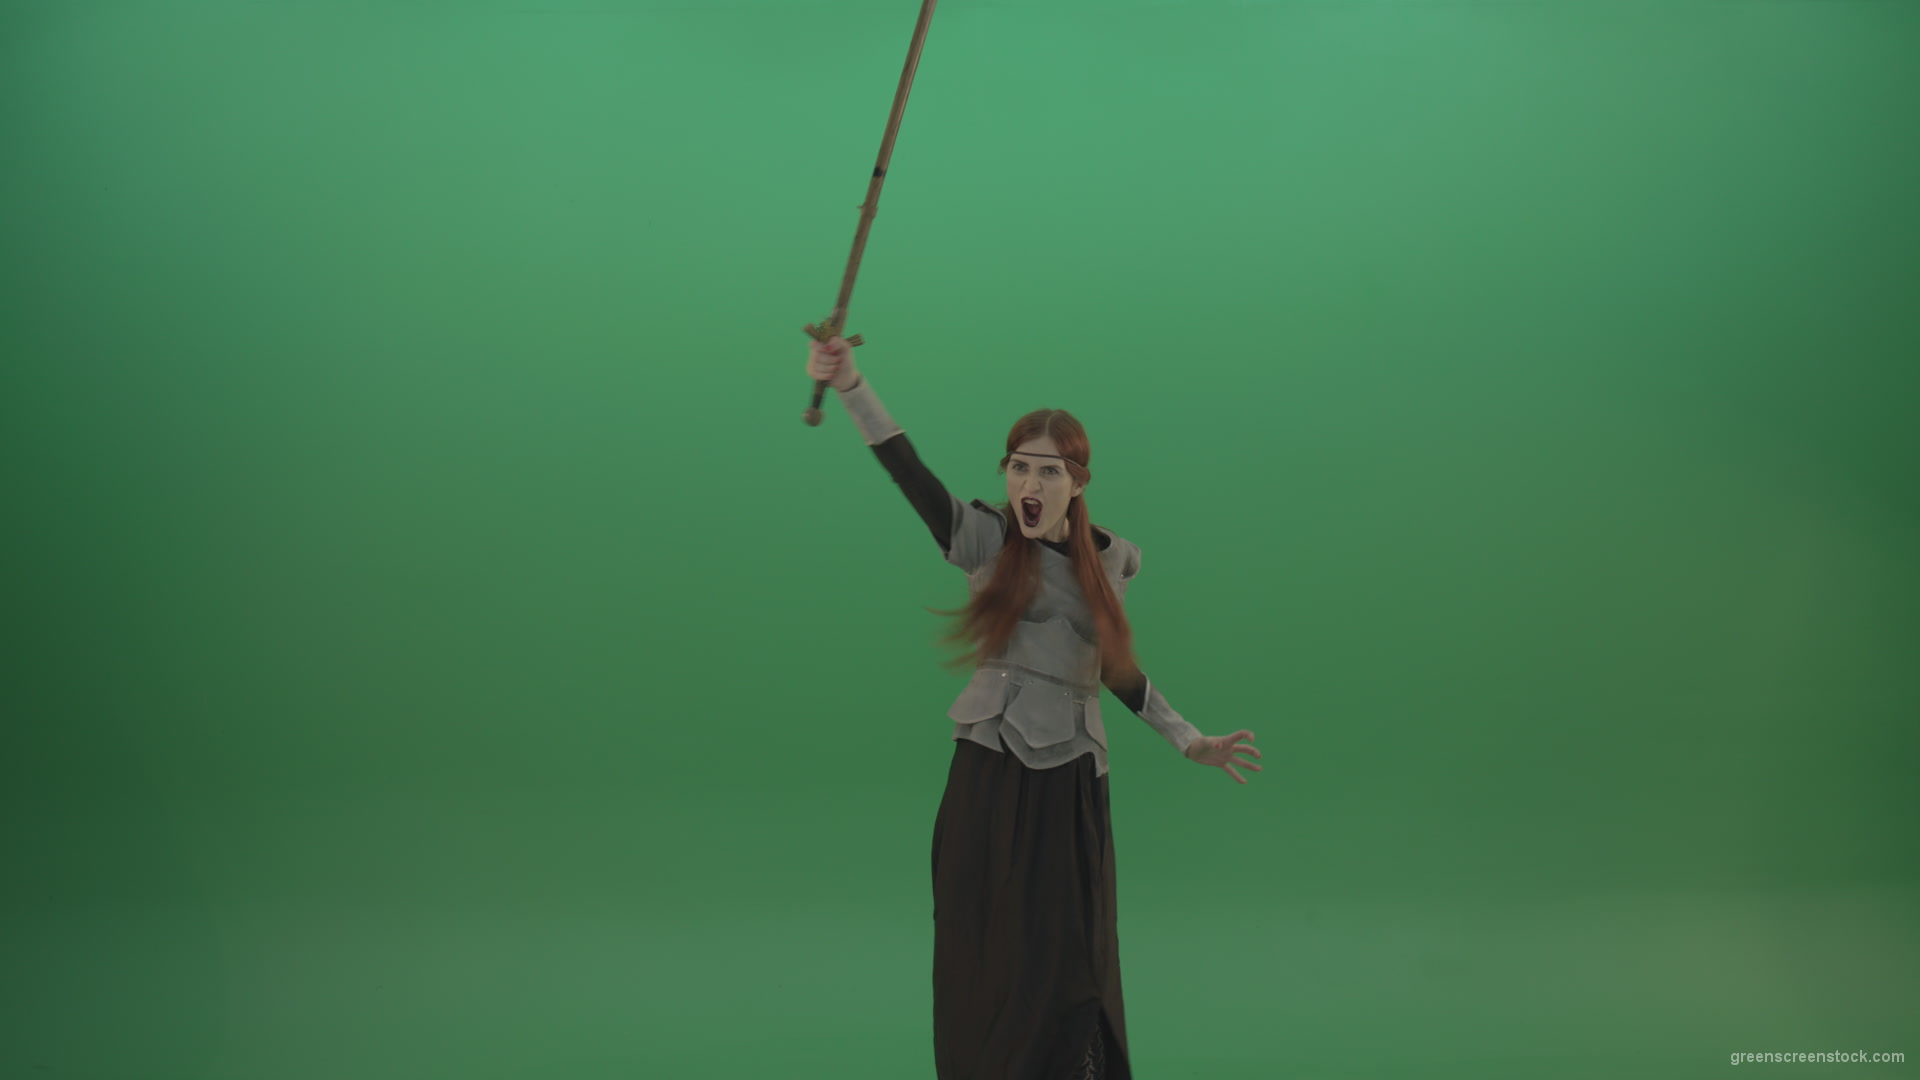 Girl-shouts-her-foes-on-an-offensive-raising-a-sword-up-on-a-green-background_005 Green Screen Stock